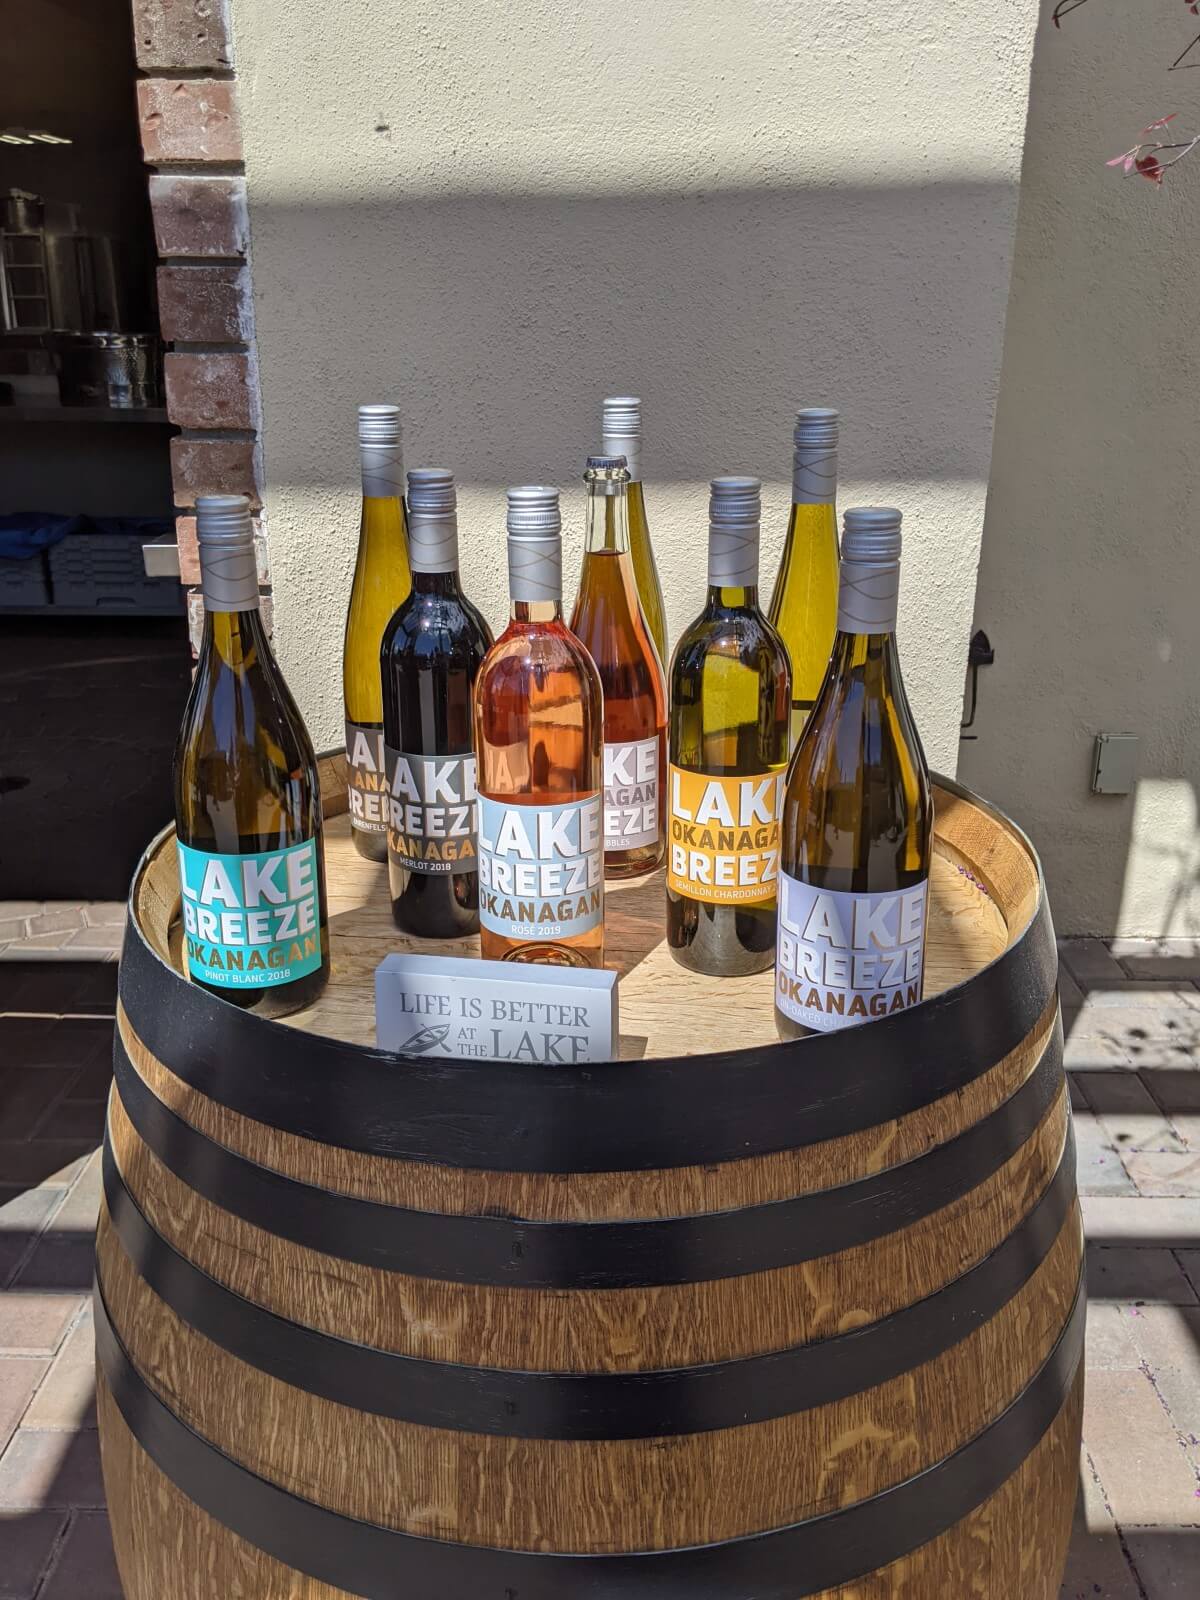 Nine Lake Breeze wine bottles stand on top of a wine barrel (multiple different colours and shapes), with a sign 'Life is Better at the Lake' in the foreground